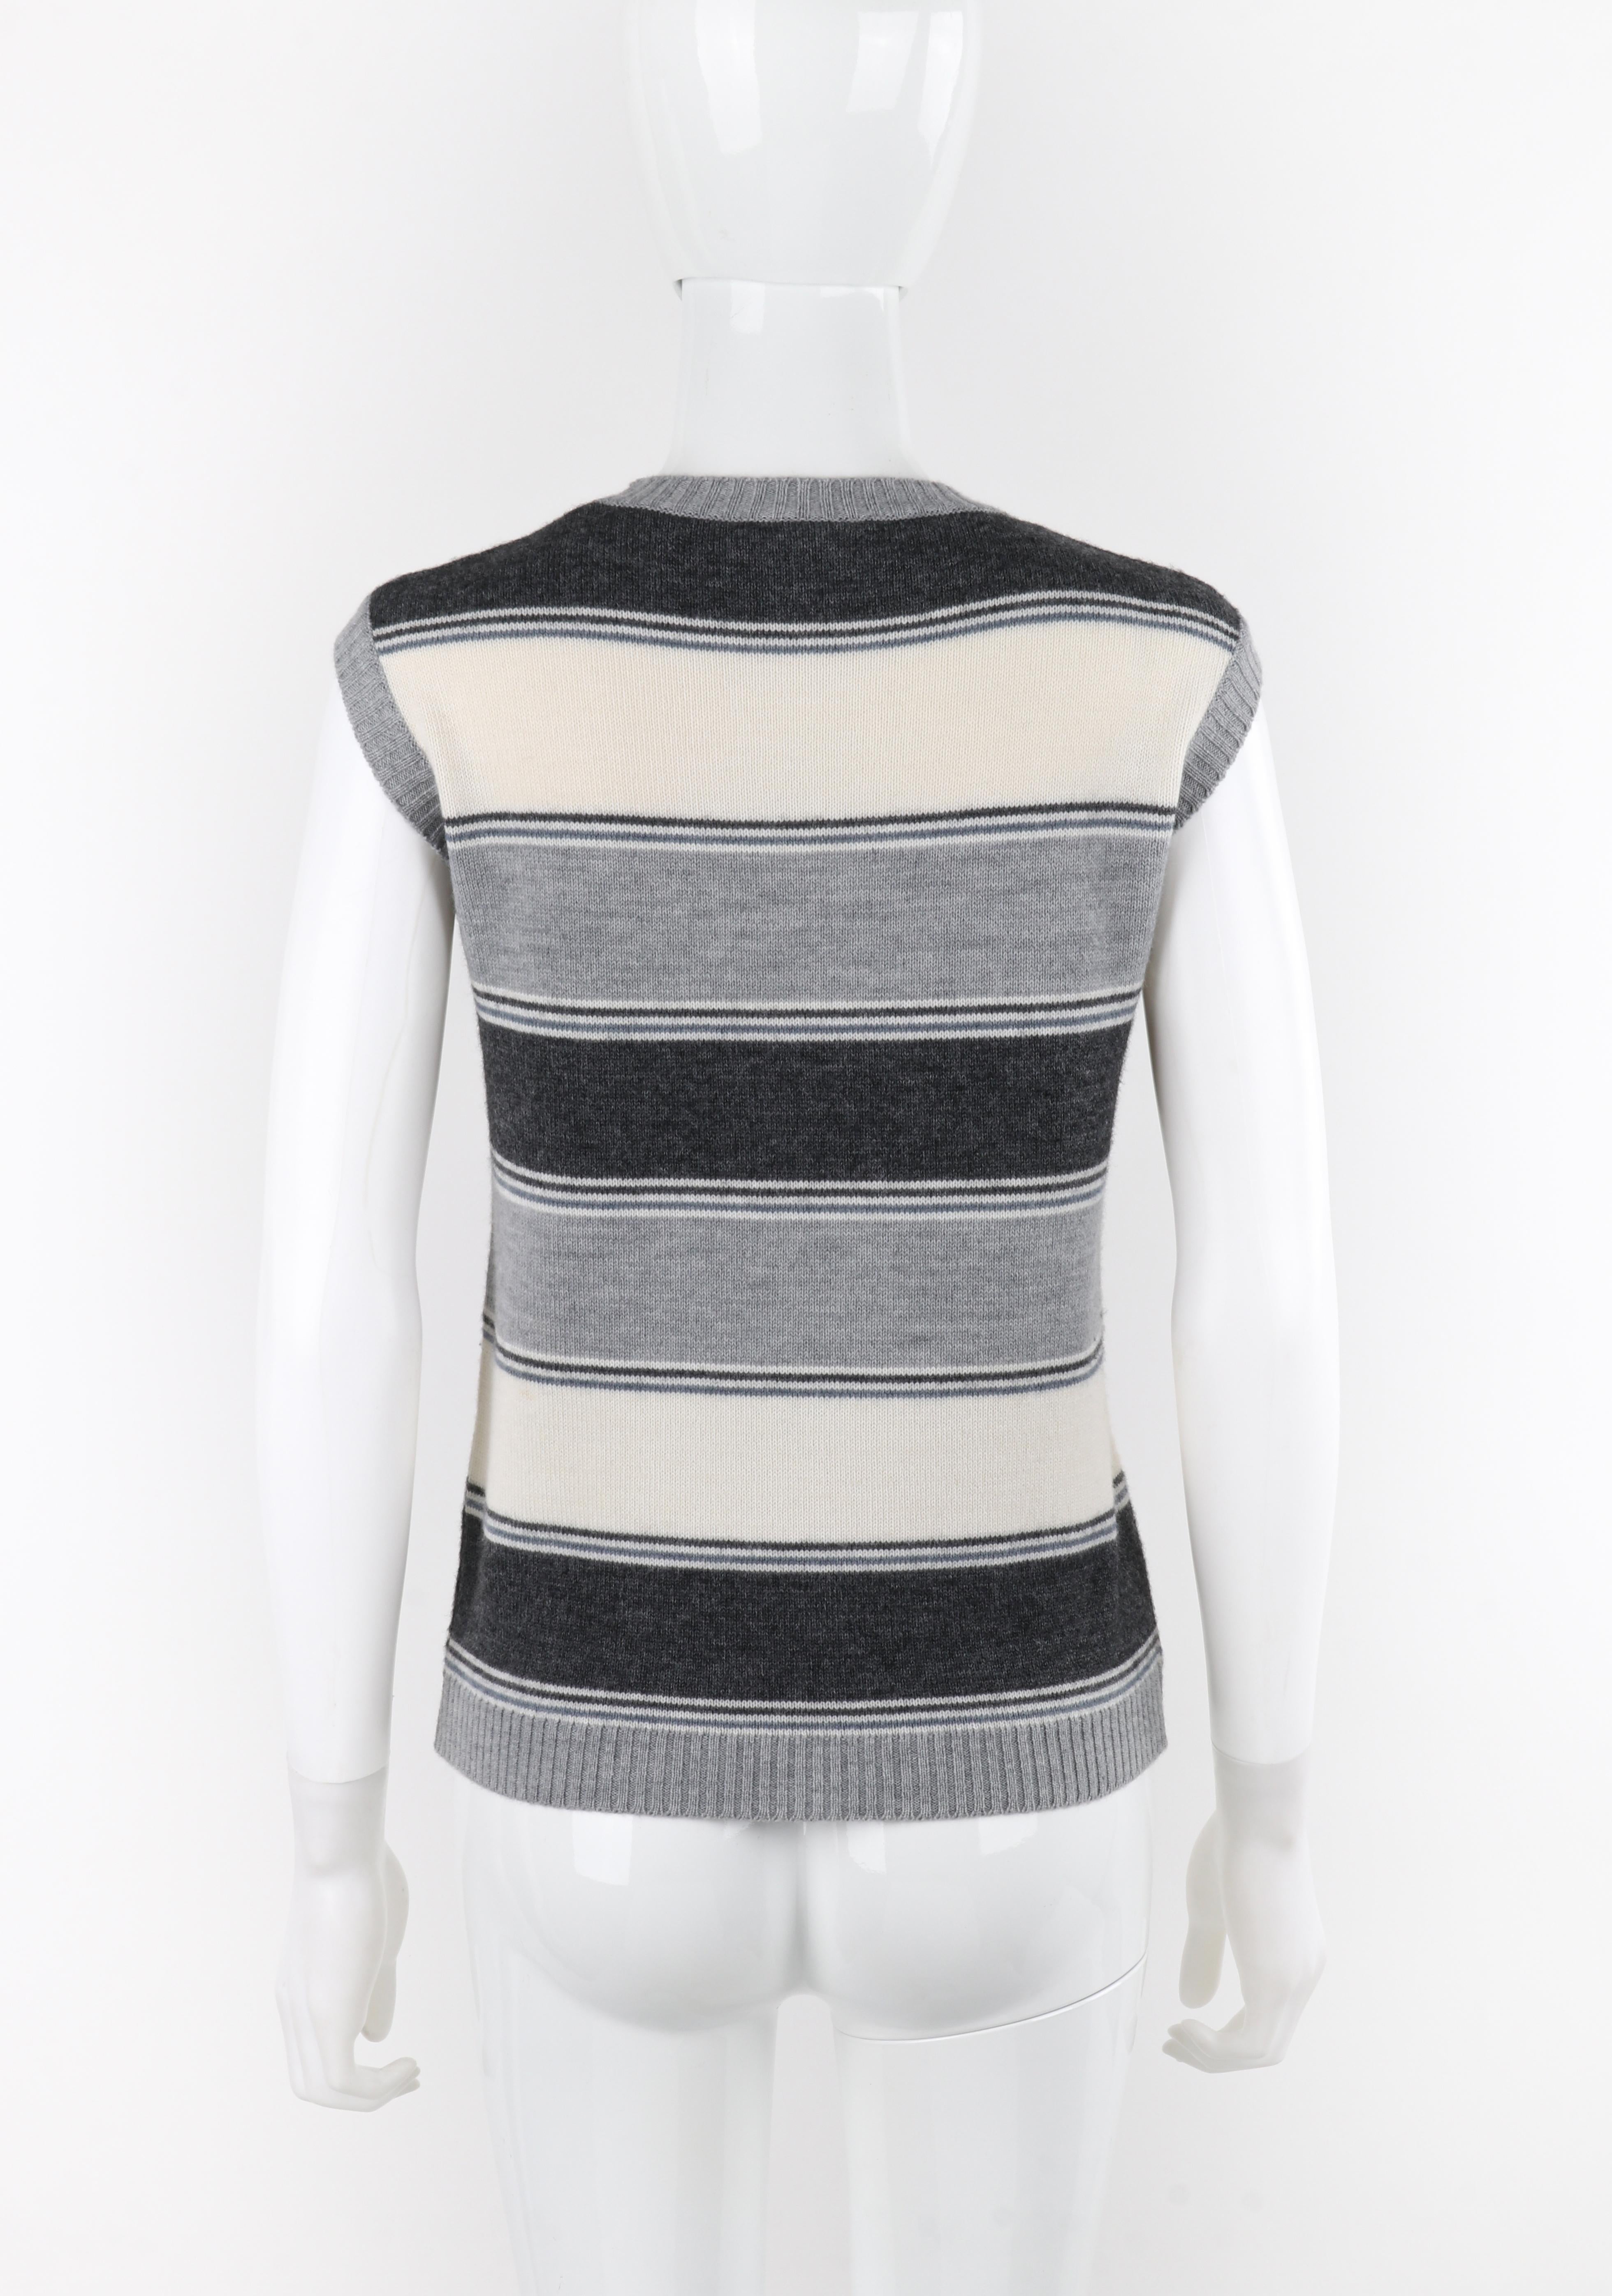 COURREGES c.1970's Gray Striped Wool Knit Sleeveless Pullover Sweater Vest Top 2